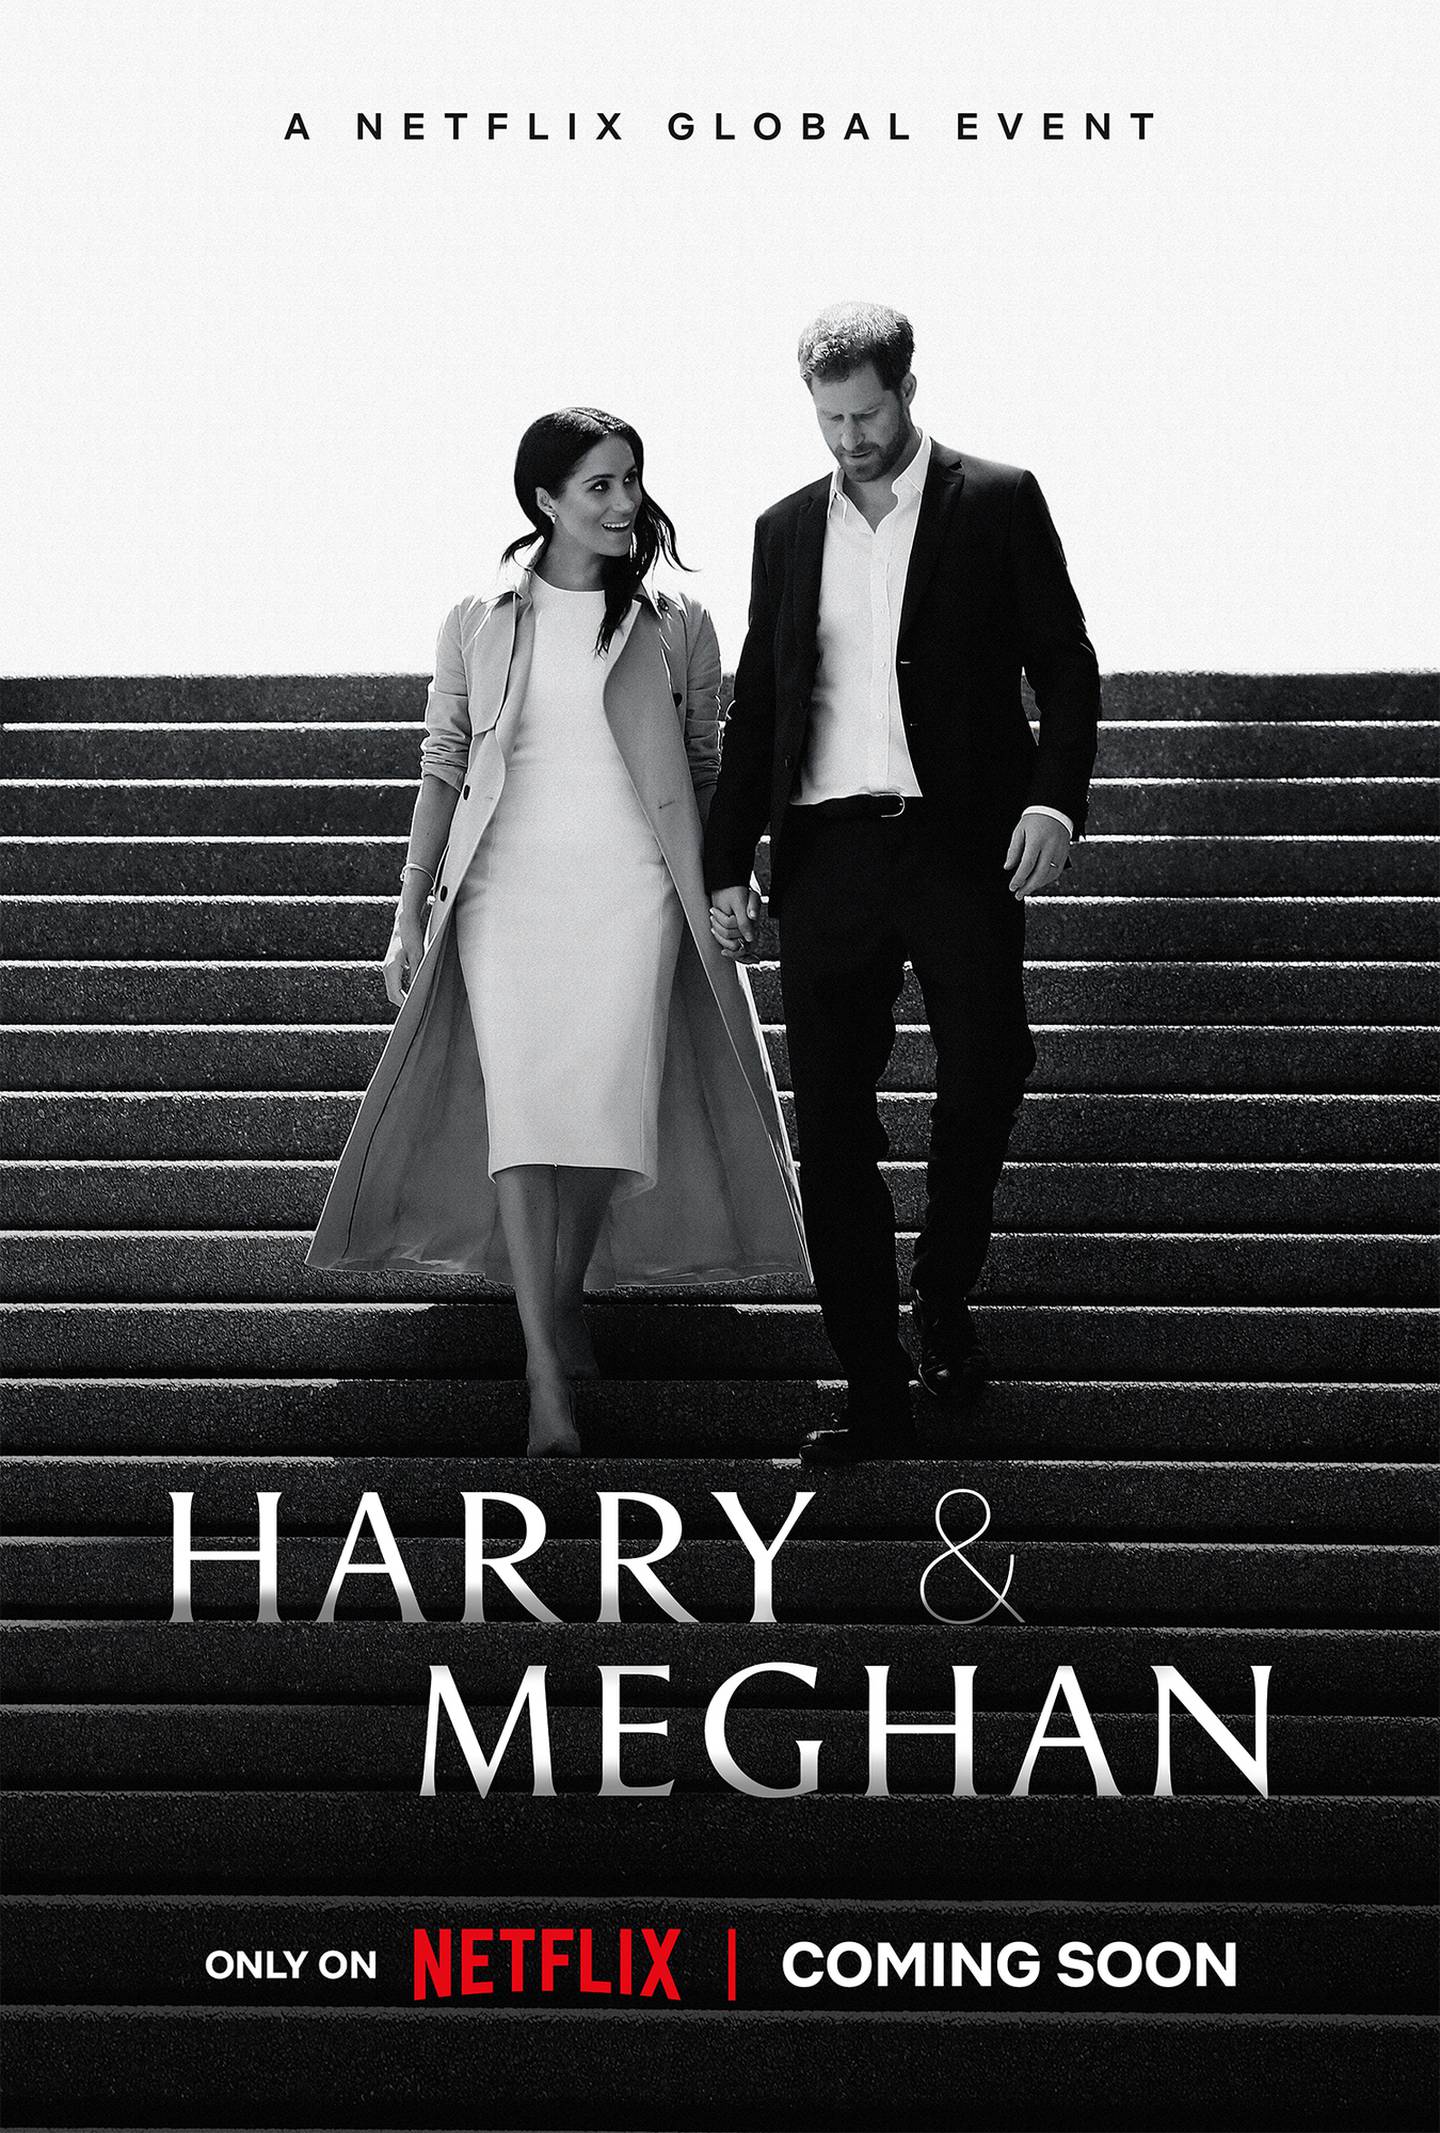 This image released by Netflix shows promotional art for the upcoming documentary "Harry & Meghan," directed by Liz Garbus. (Netflix via AP)